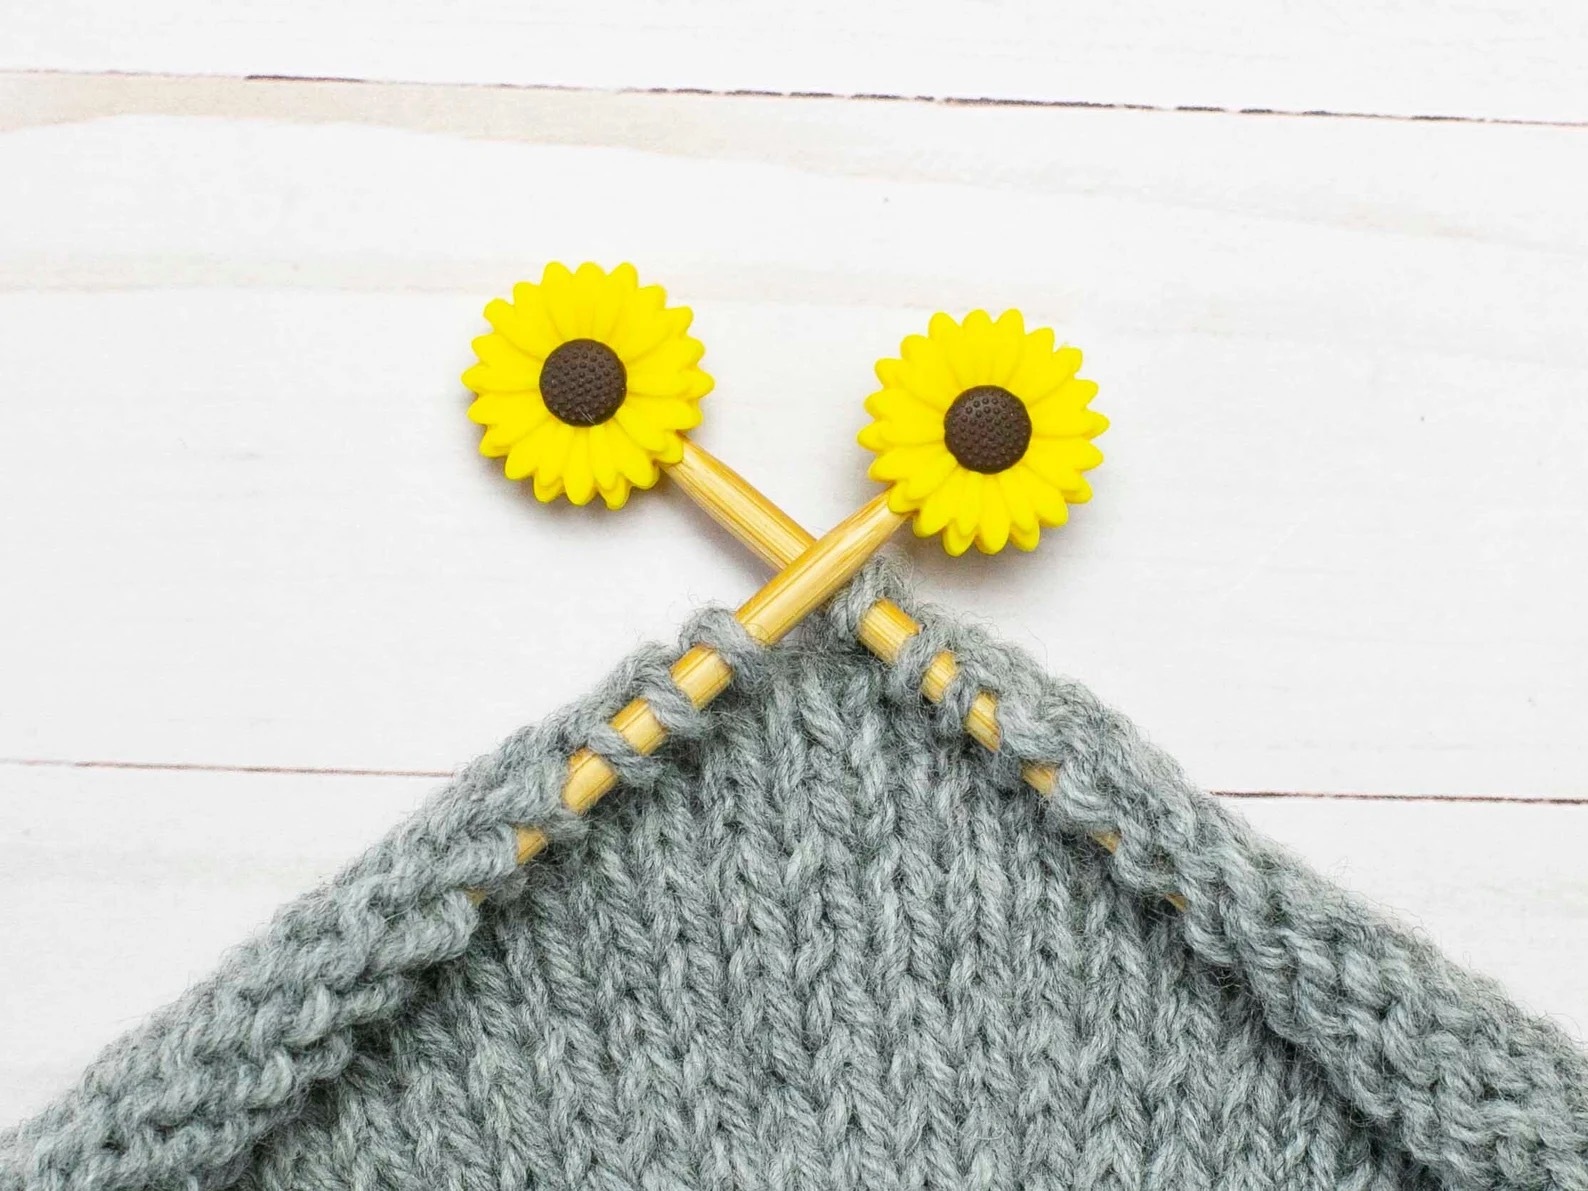 Needle point protectors Knitting needle stoppers Sunflowers knitting notions knitting accessories